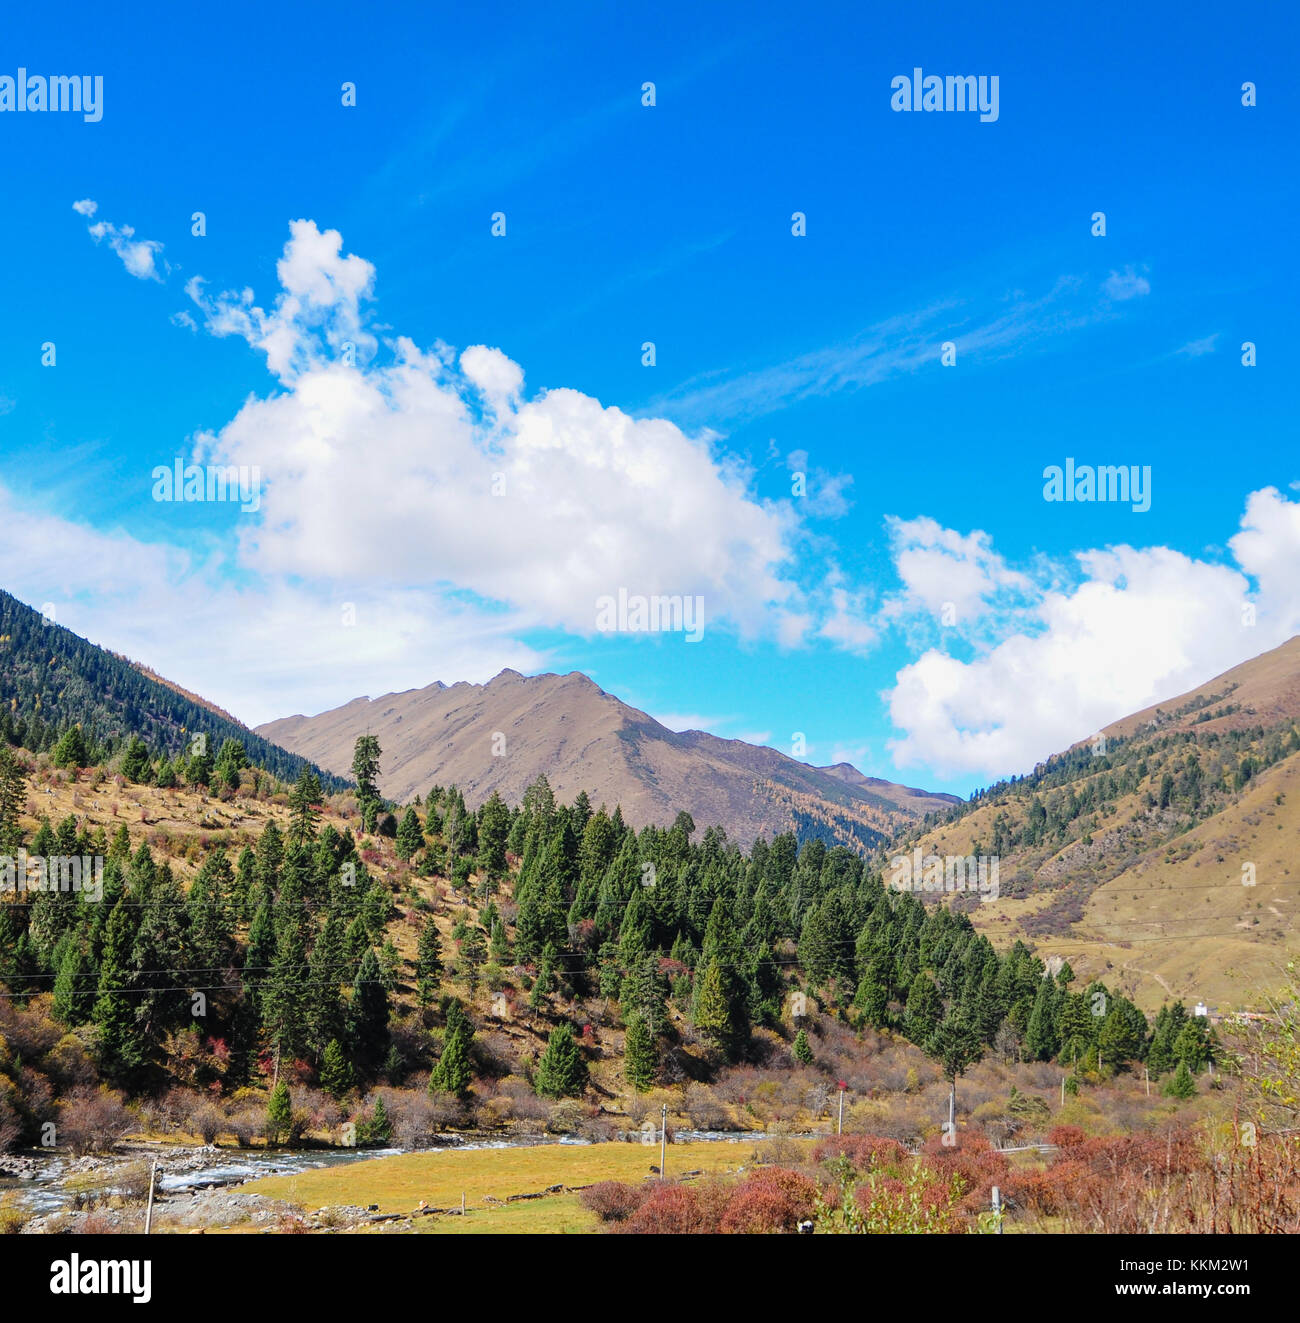 View of high mountains in Huanglong national park, Sichuan, province, China. Stock Photo